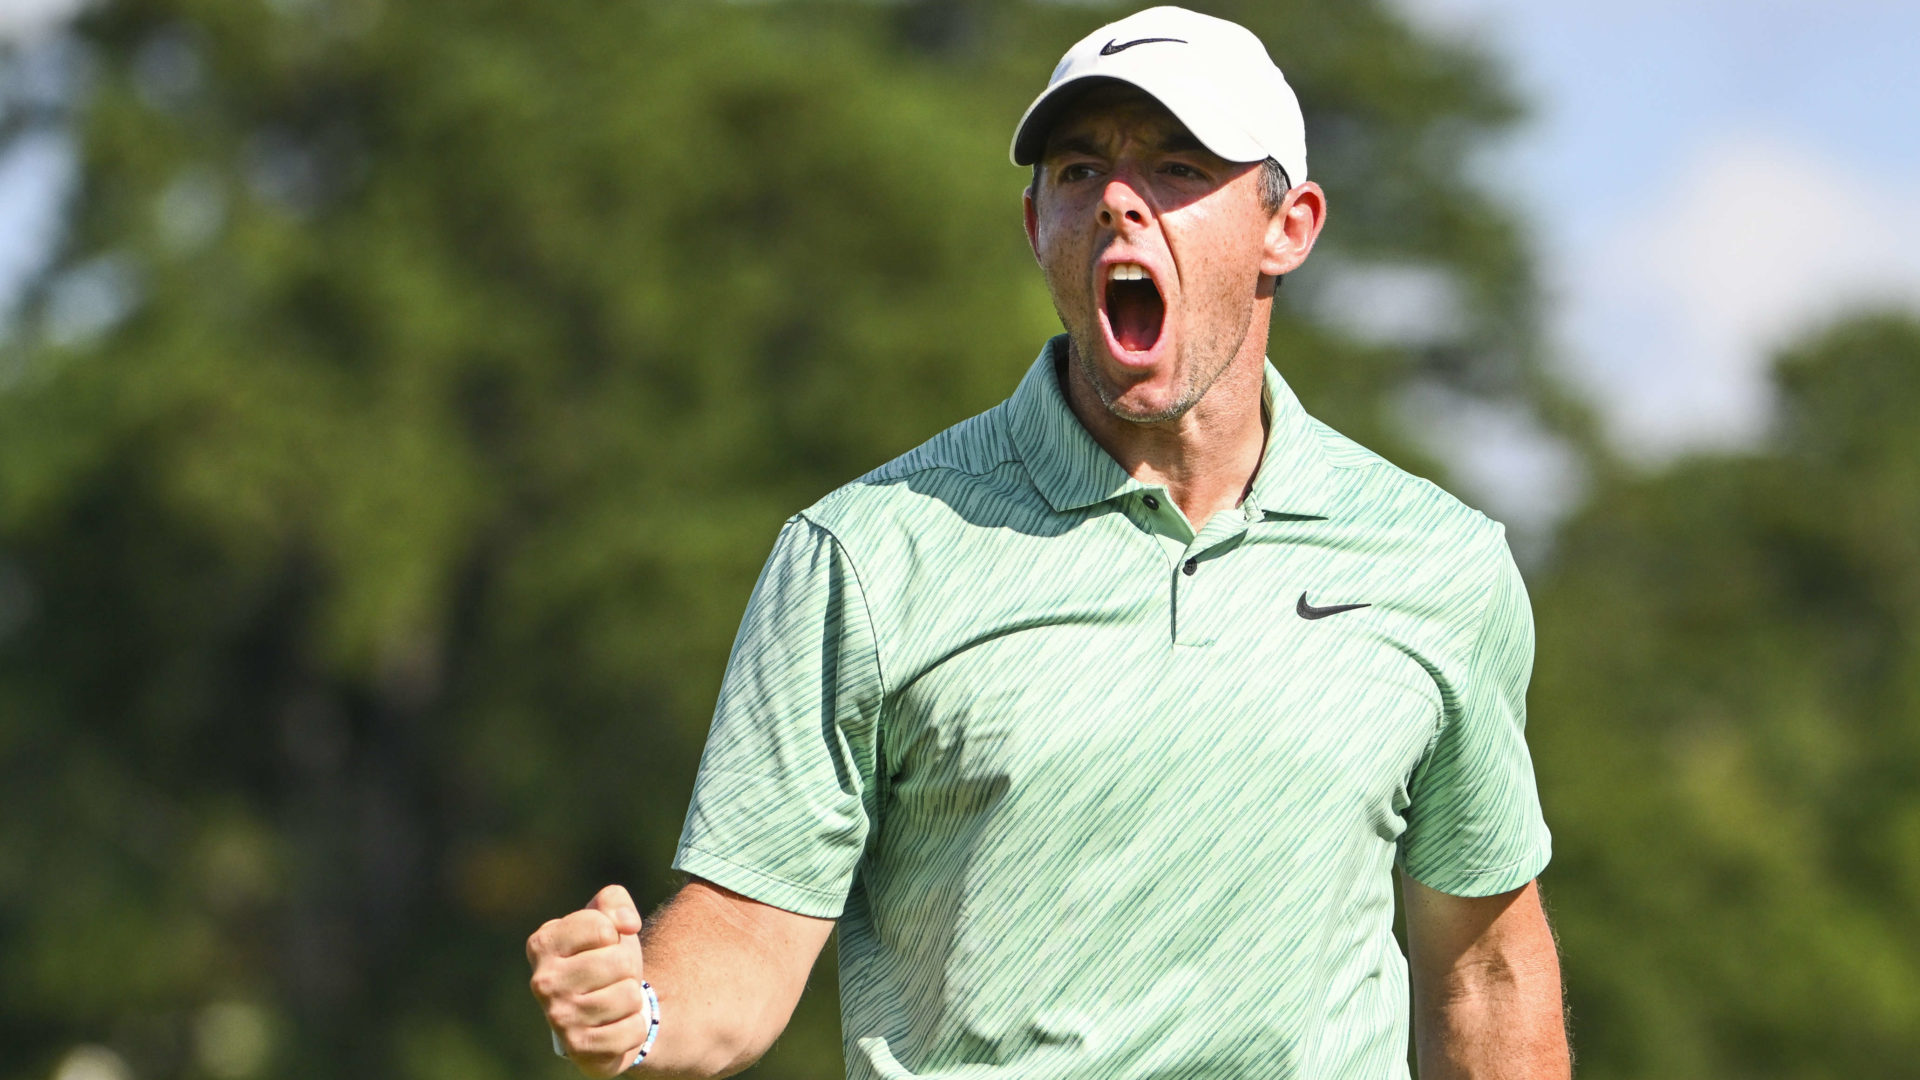 ATLANTA, GEORGIA - AUGUST 28: Rory McIlroy of Northern Ireland pumps his fist after making birdie at the 15th green during the final round of the TOUR Championship at East Lake Golf Club on August 28, 2022 in Atlanta, Georgia. tour news(Photo by Tracy Wilcox/PGA TOUR via Getty Images)